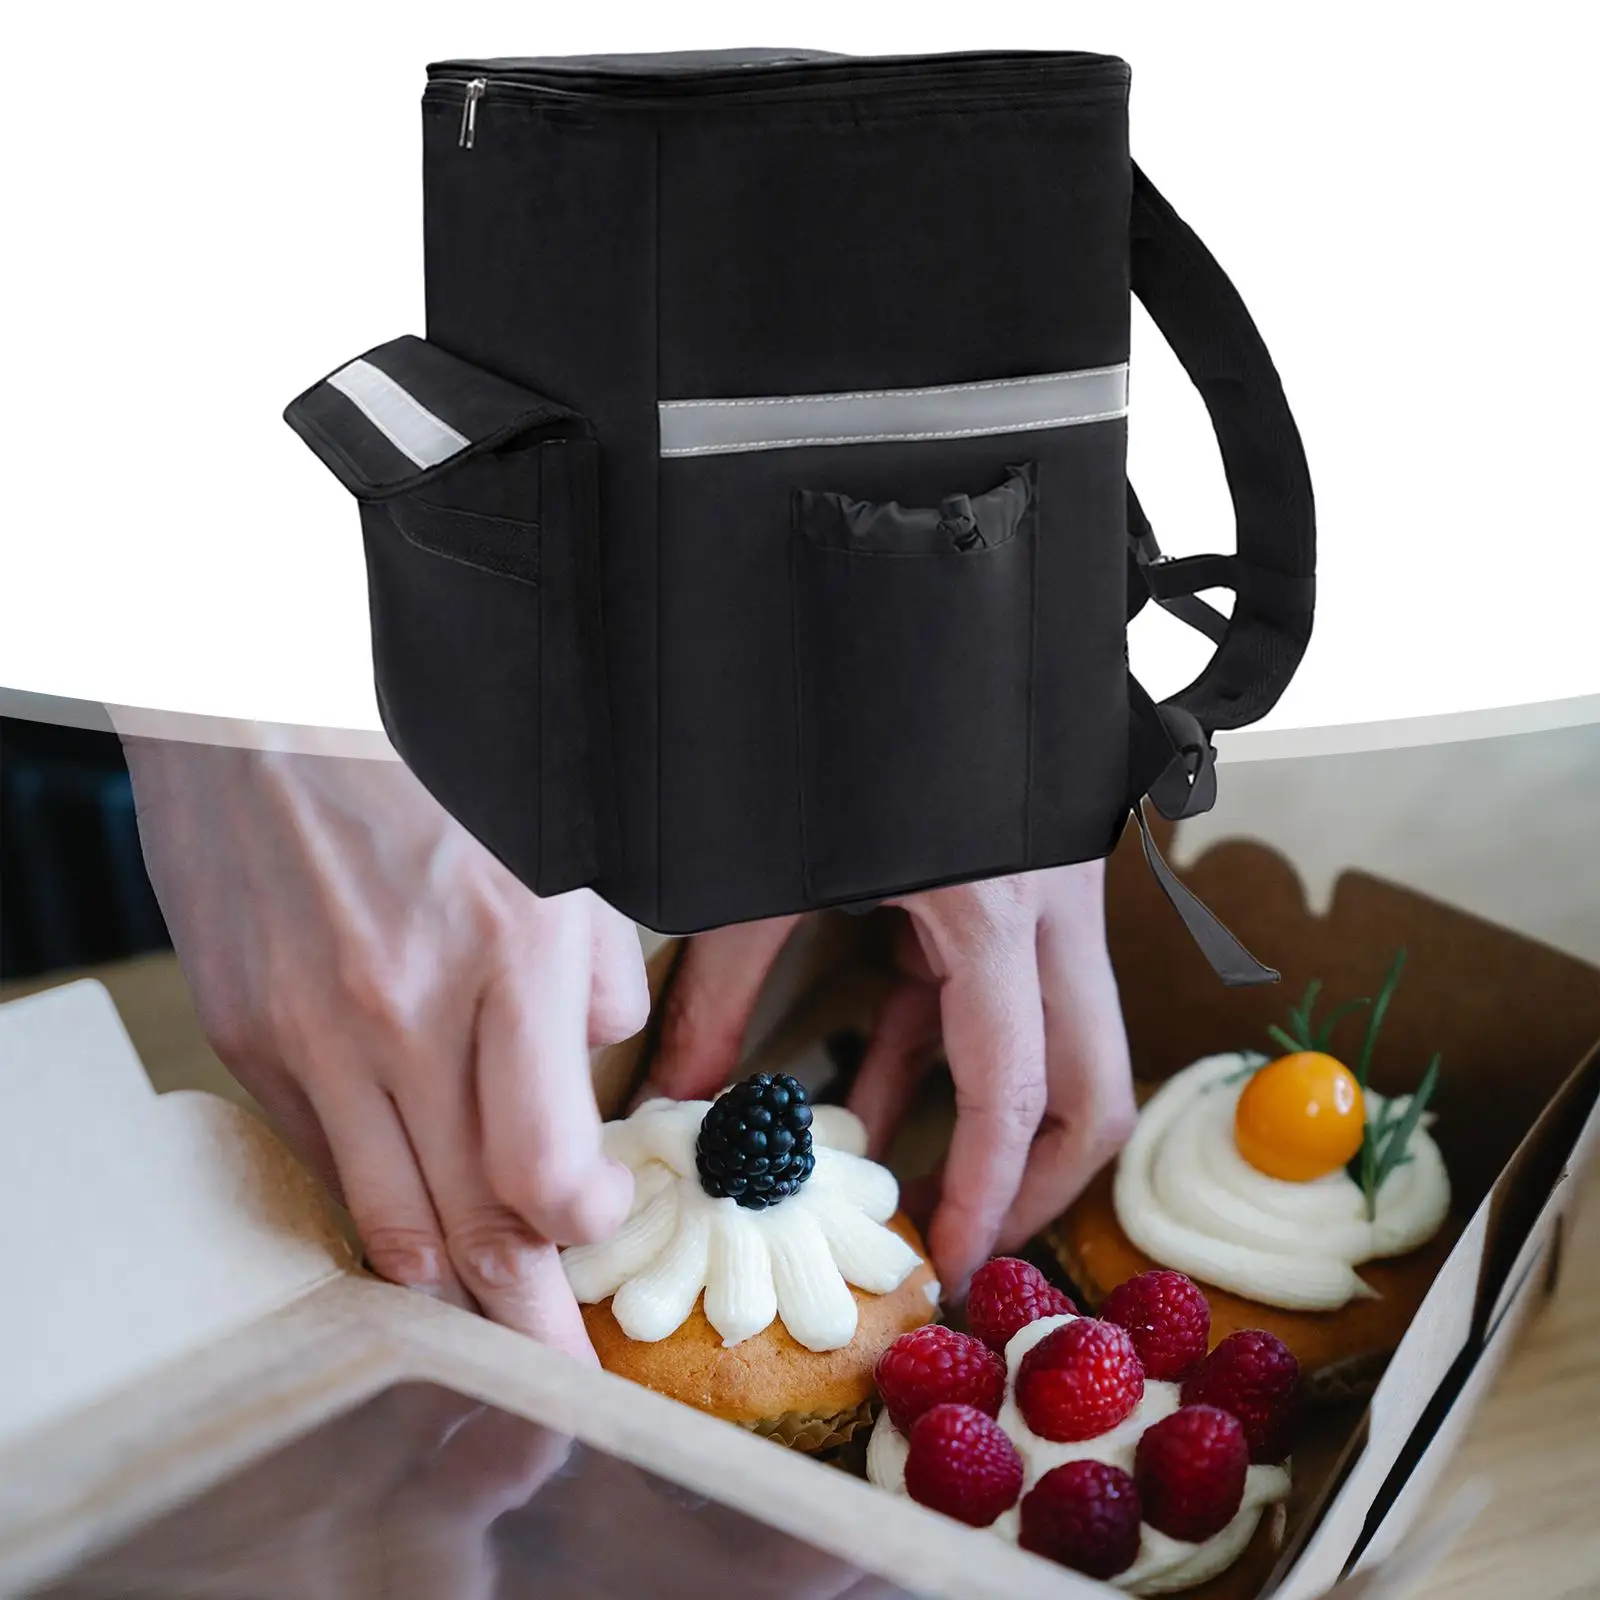 Thermal Food Delivery Bag Waterproof coolers Bag for Travel Camping Festivals